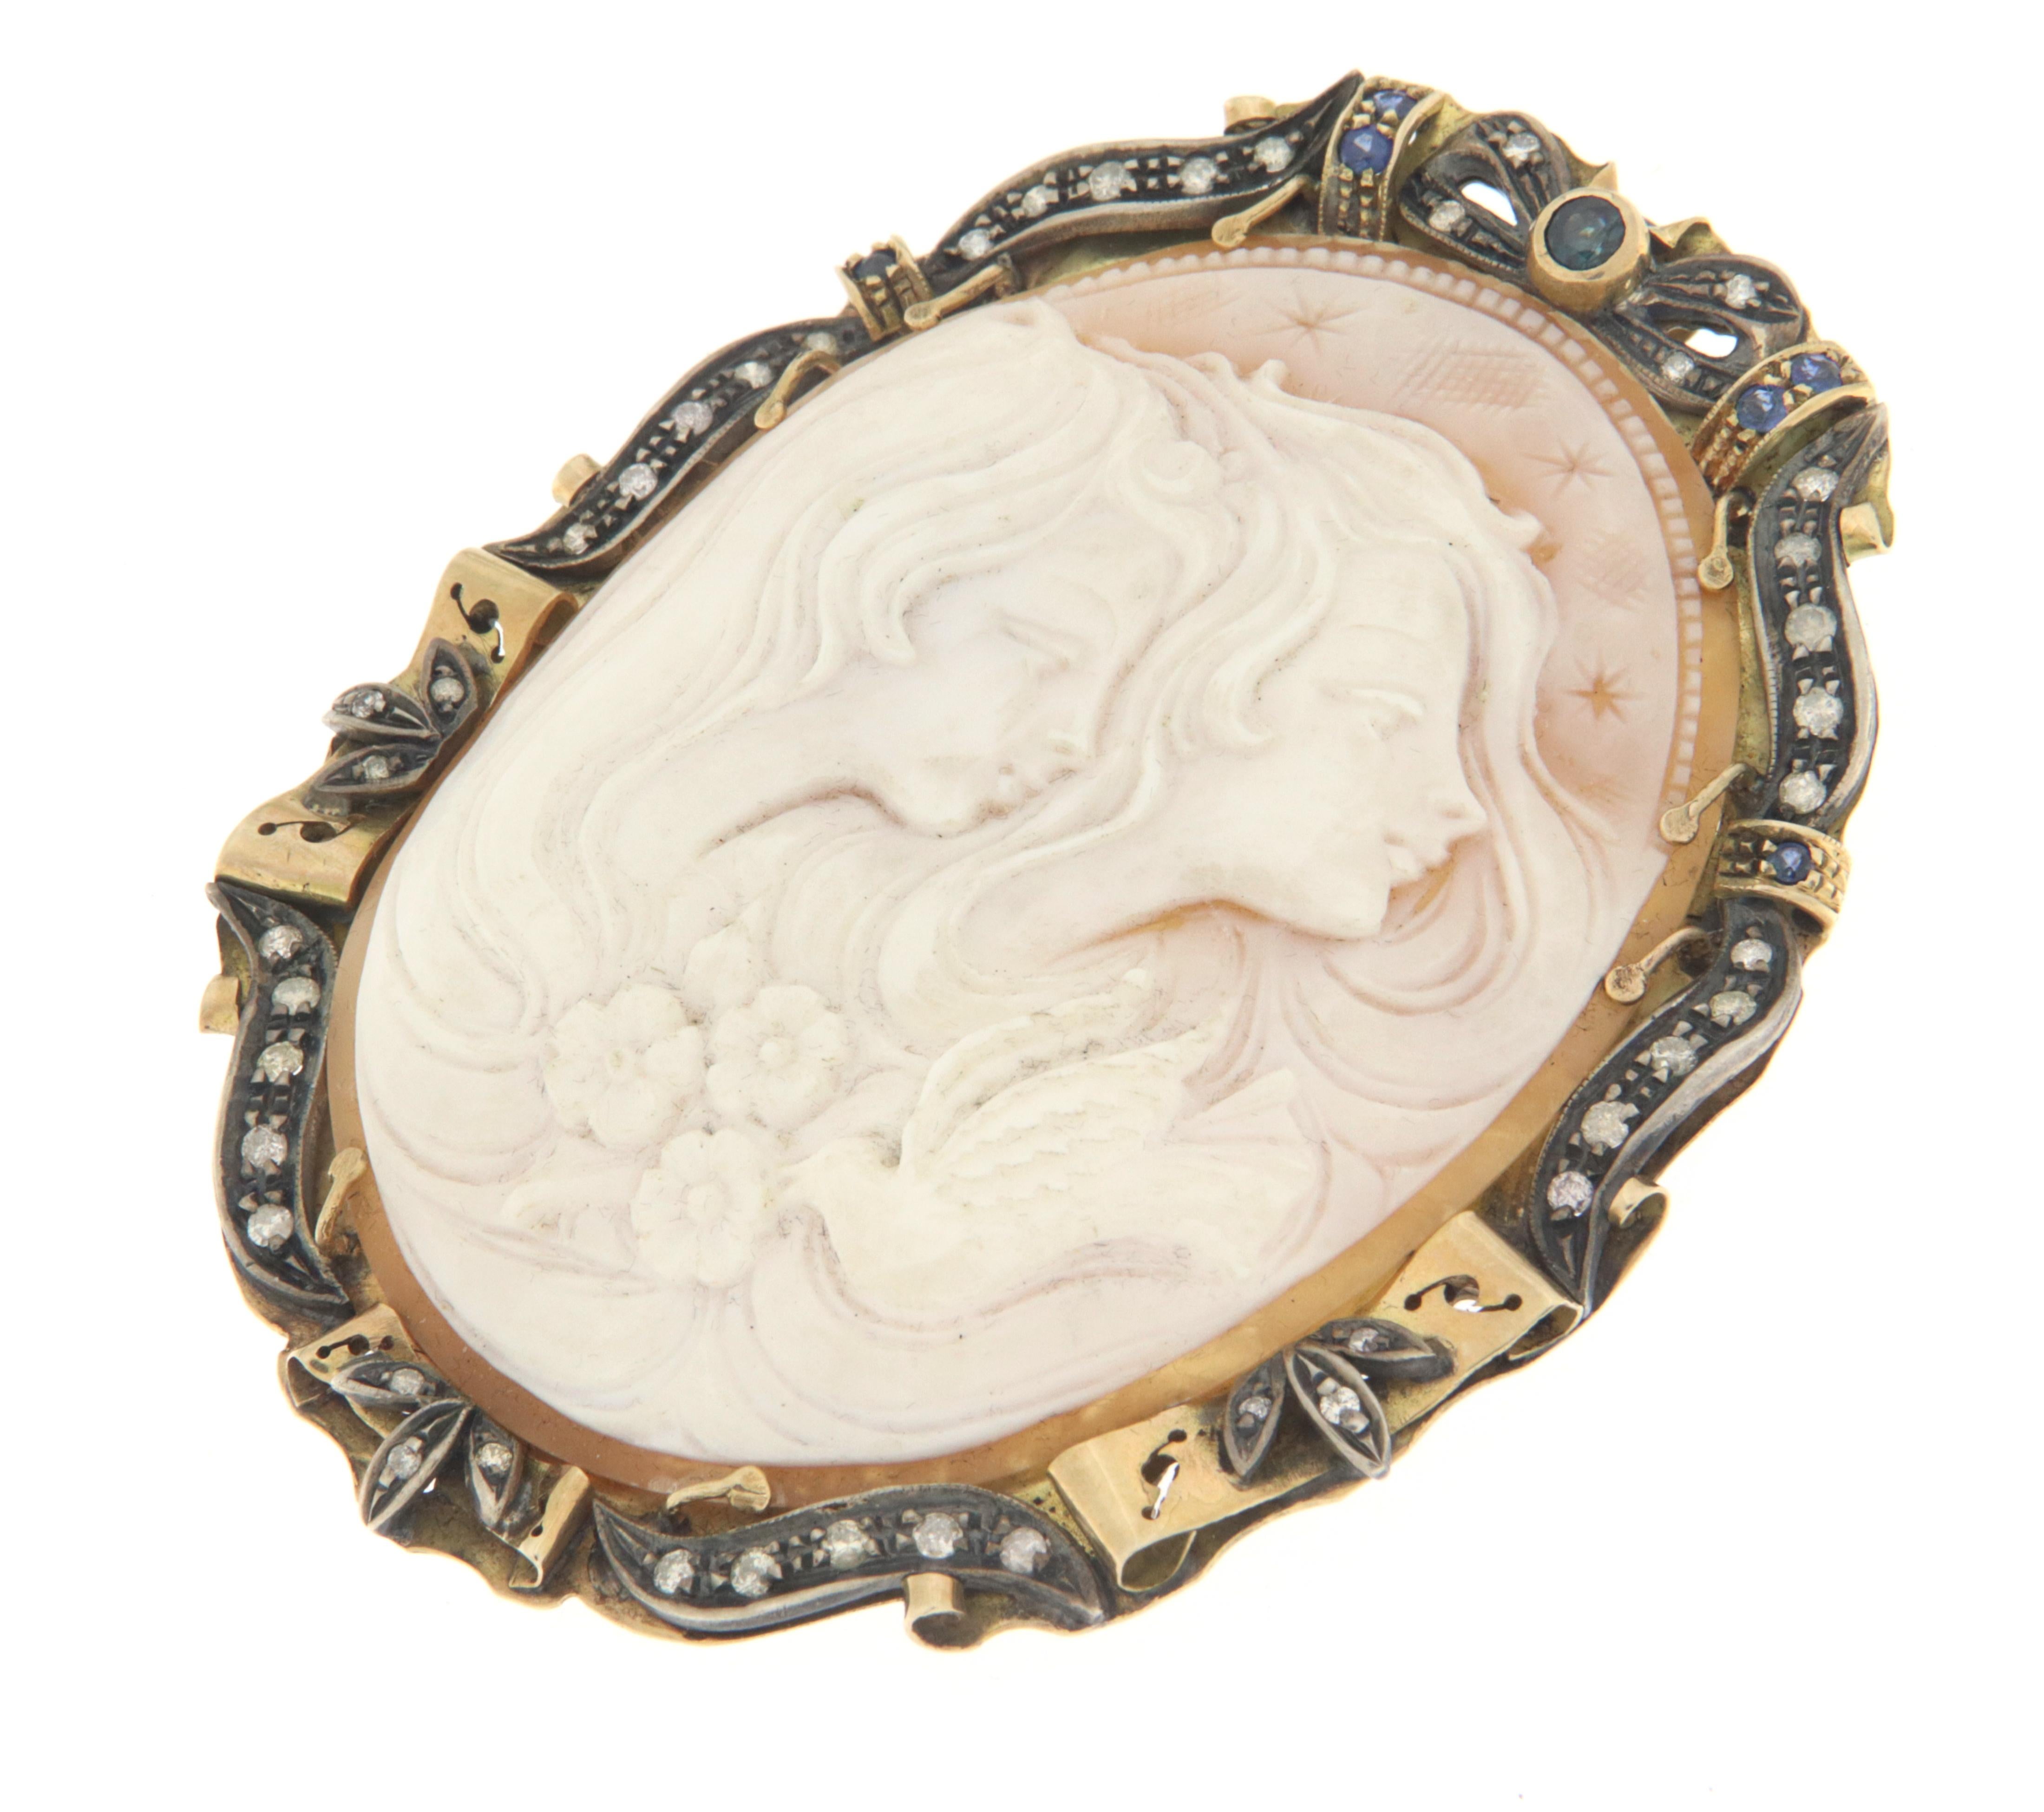 For any problems related to some materials contained in the items that do not allow shipping and require specific documents that require a particular period, please contact the seller with a private message to solve the problem.

Cameo 9 karat